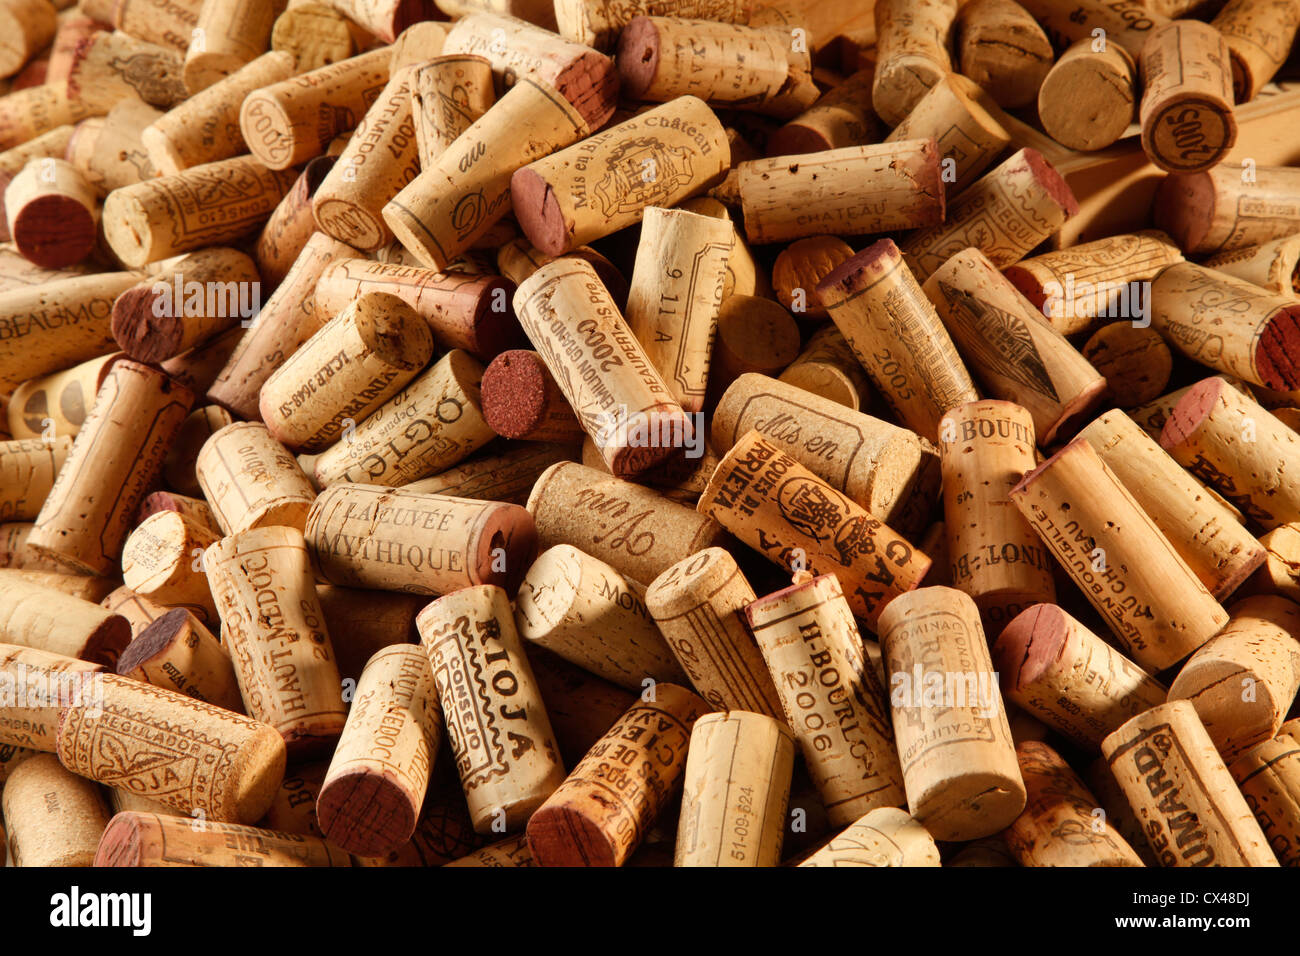 Group of Wine corks Stock Photo